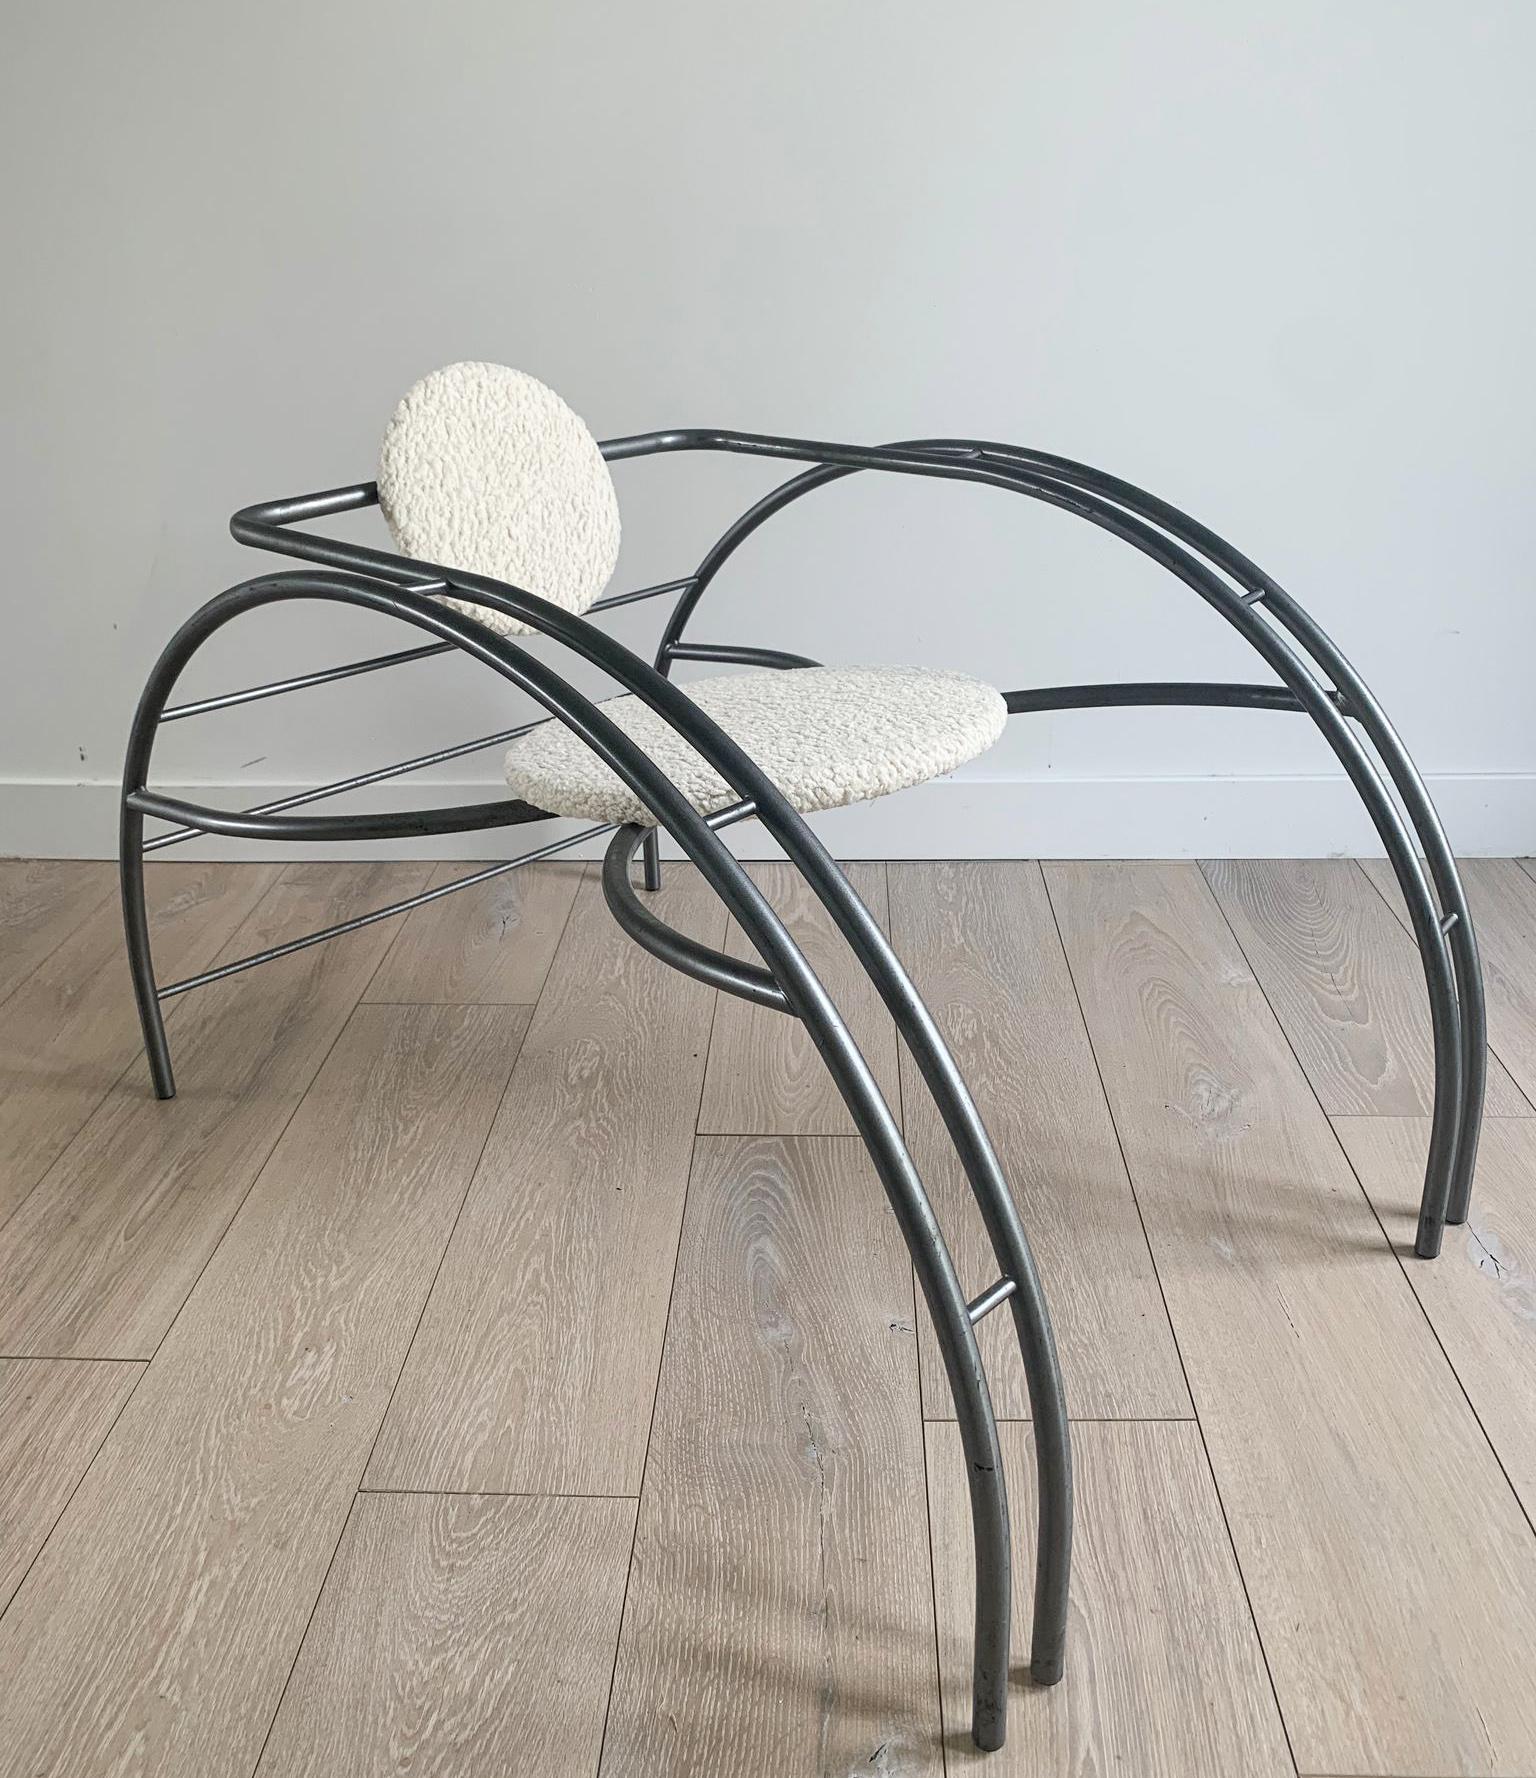 Post-Modern Postmodern Les Amisca Quebec 69 Spider Chair